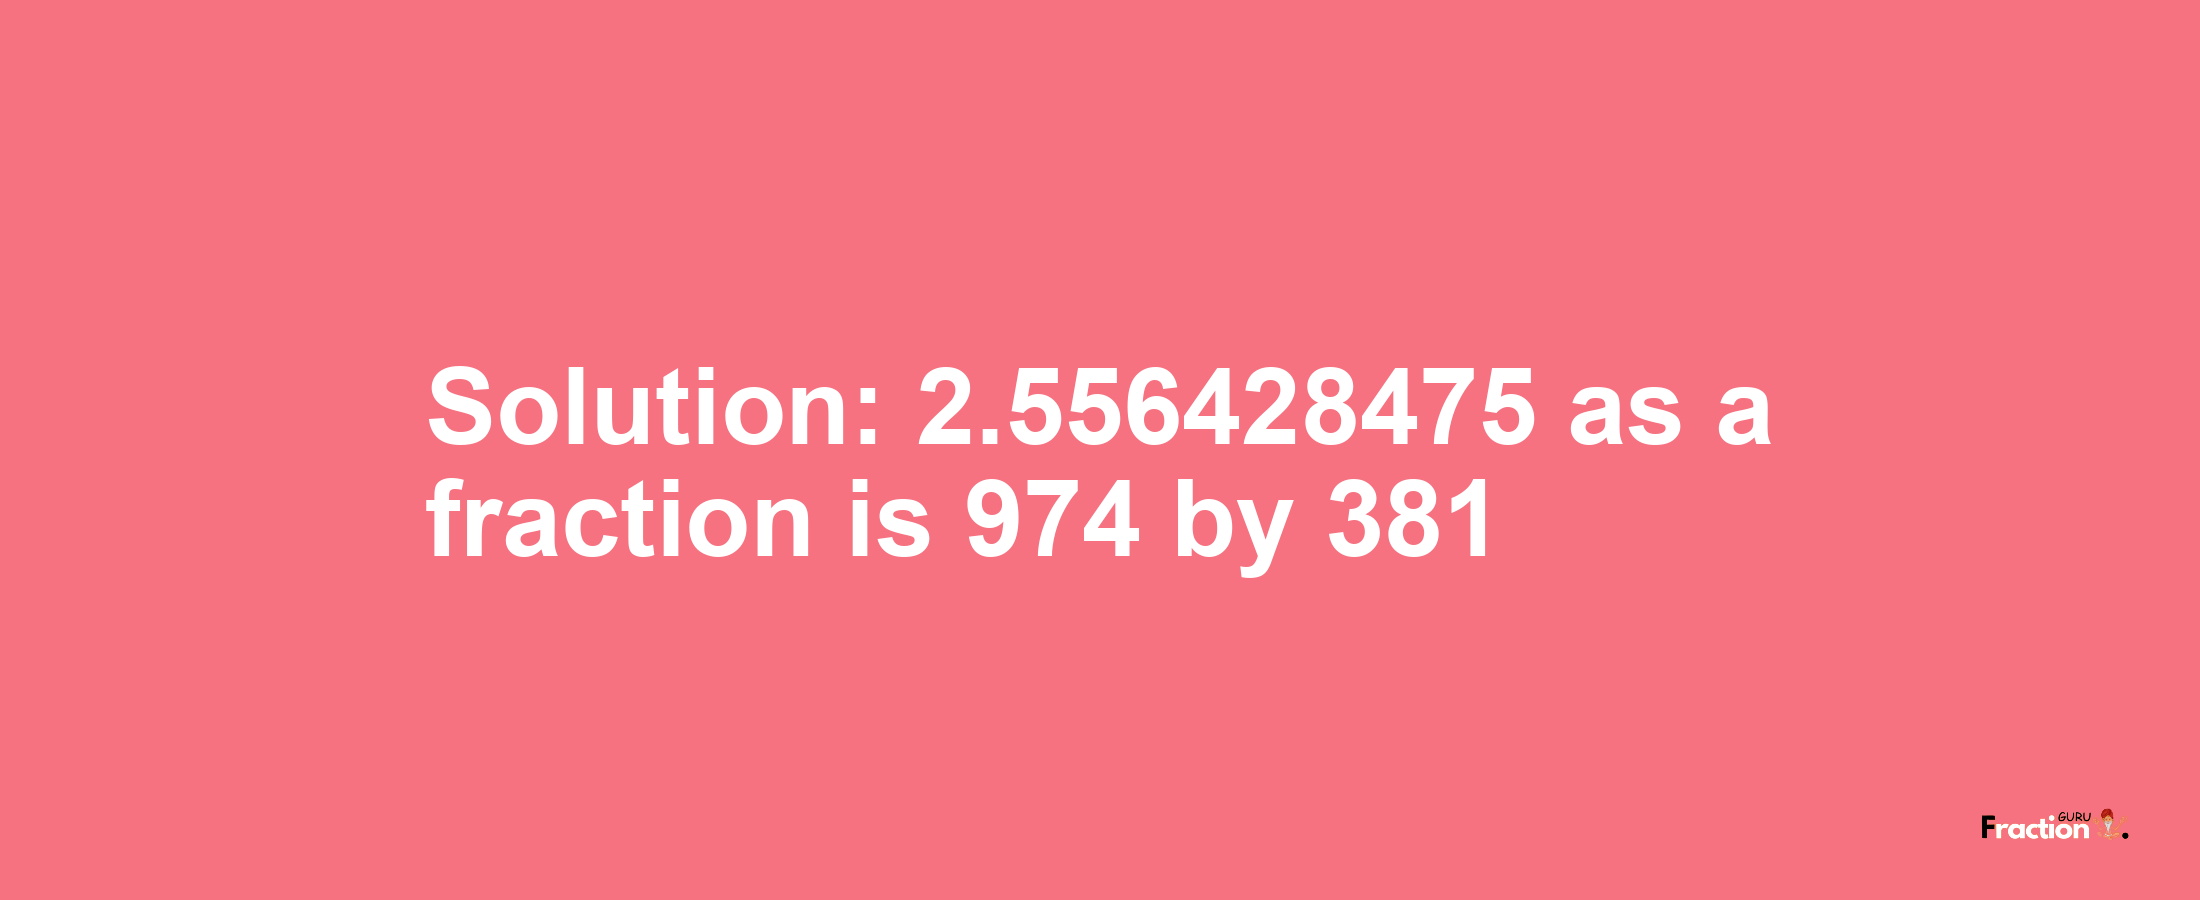 Solution:2.556428475 as a fraction is 974/381